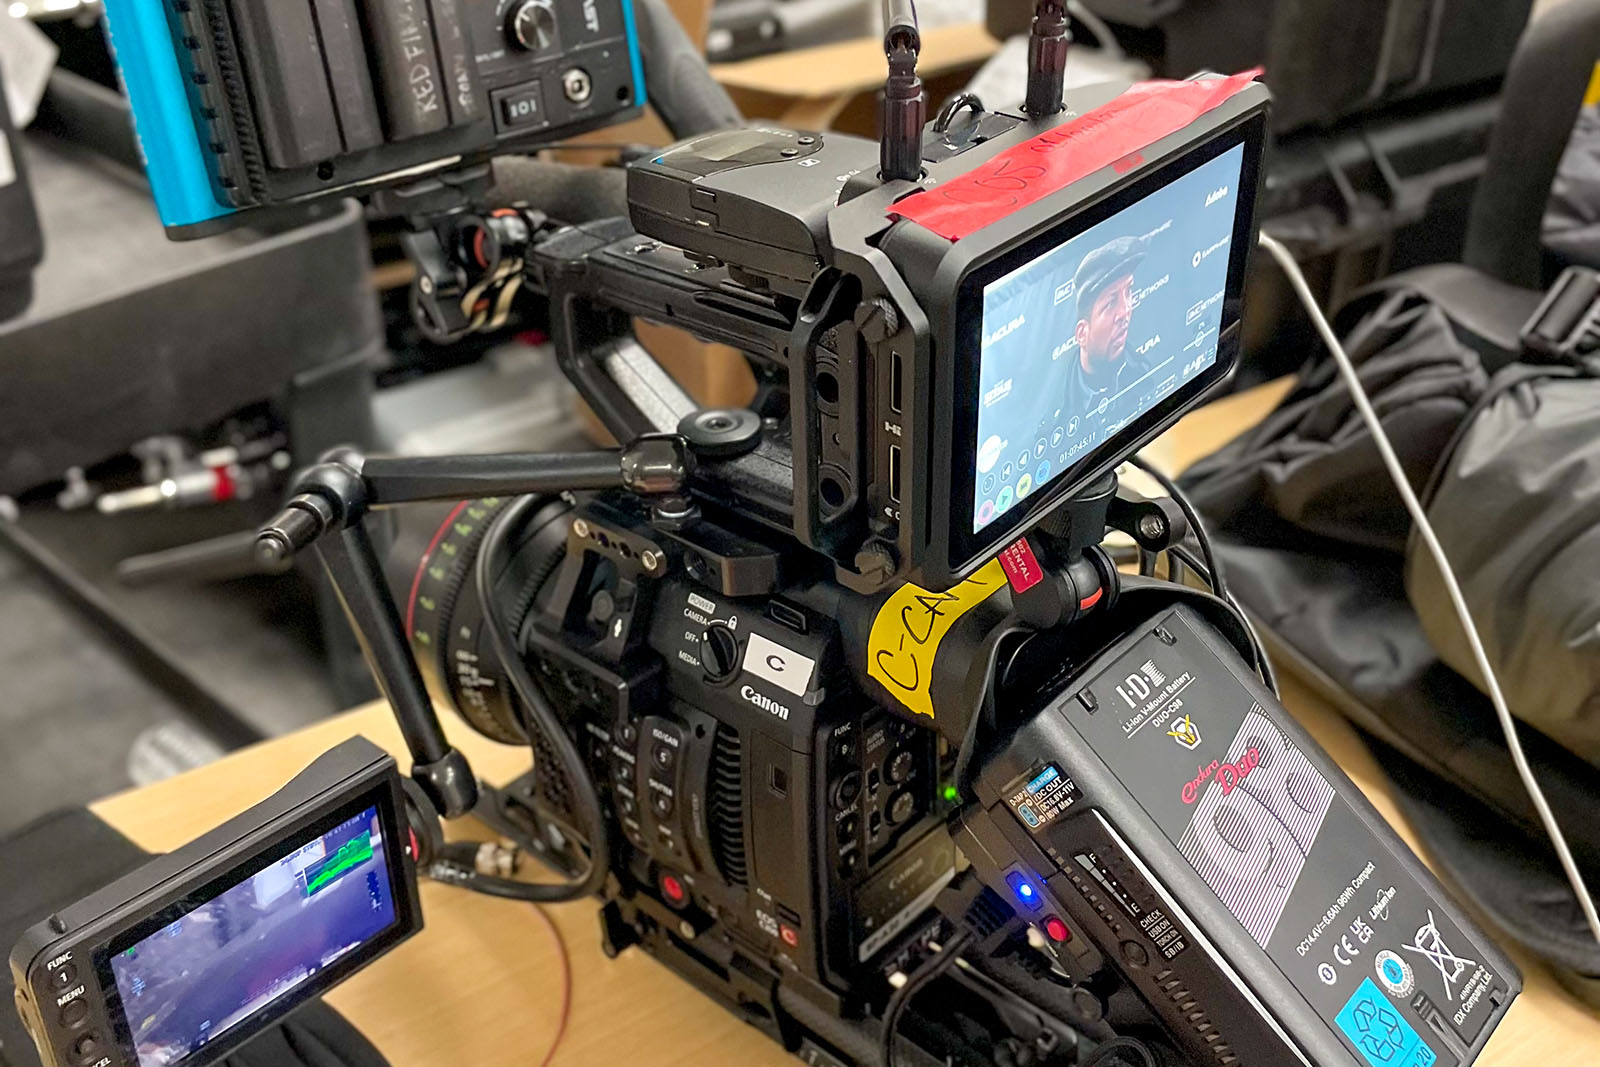 A closer look at the Canon C200 Sundance rig with the Atomos CONNECT and Ninja V mount. Image courtesy of Atomos.